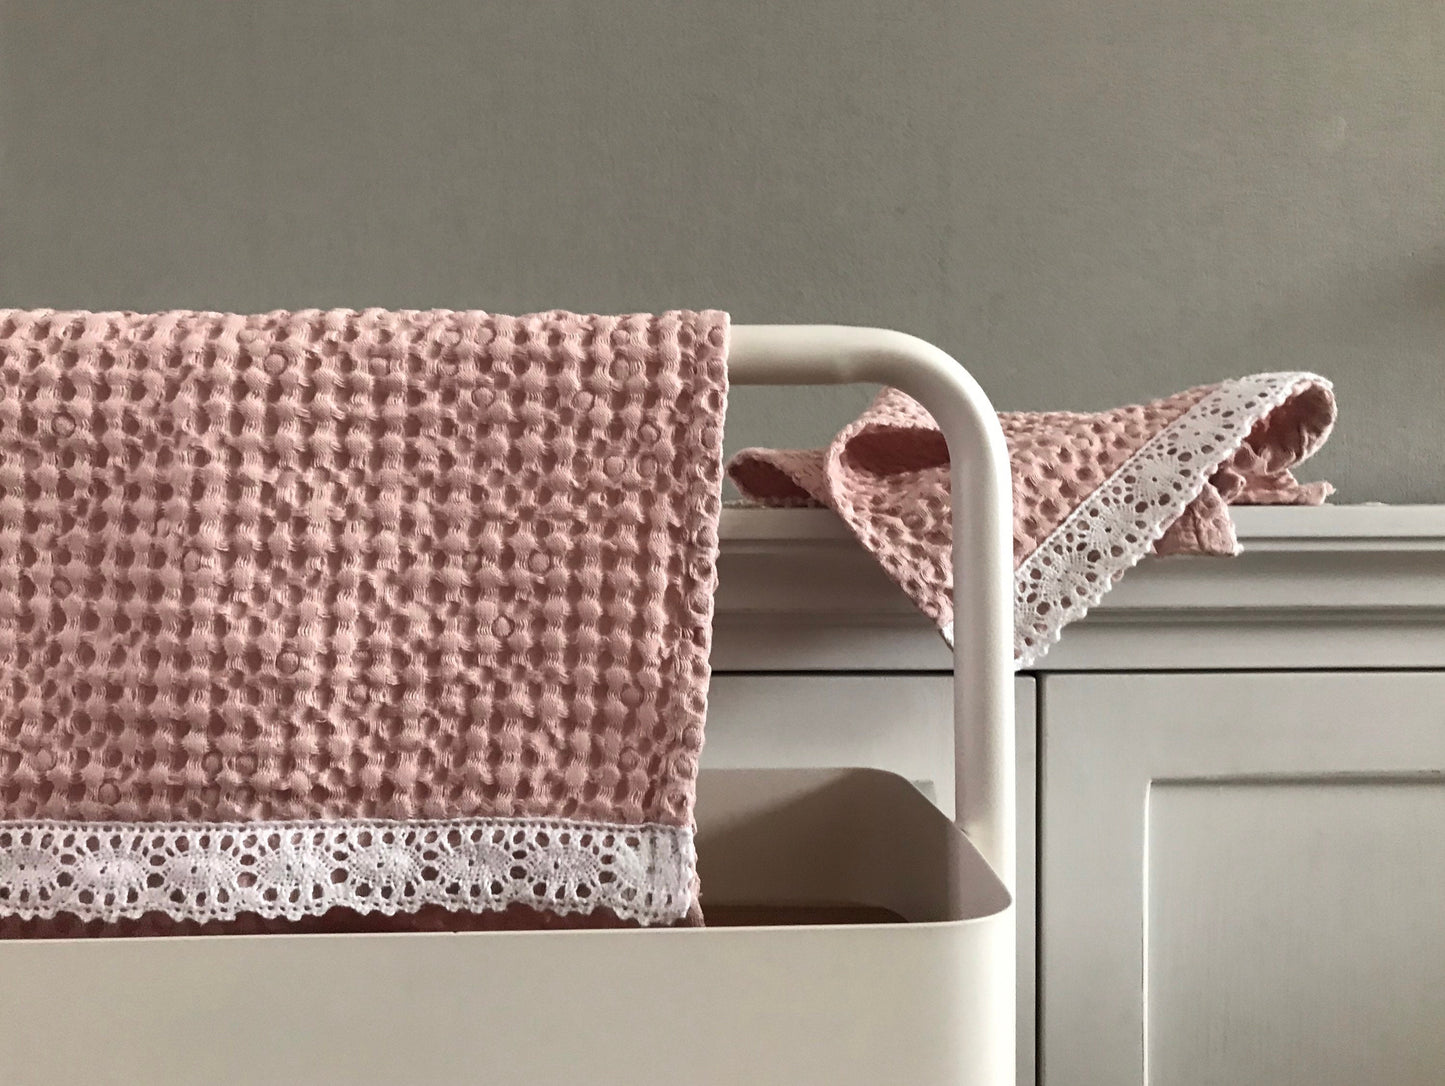 Fingertip waffle towel with lace. Waffle weave linen cotton blend. Light pink.